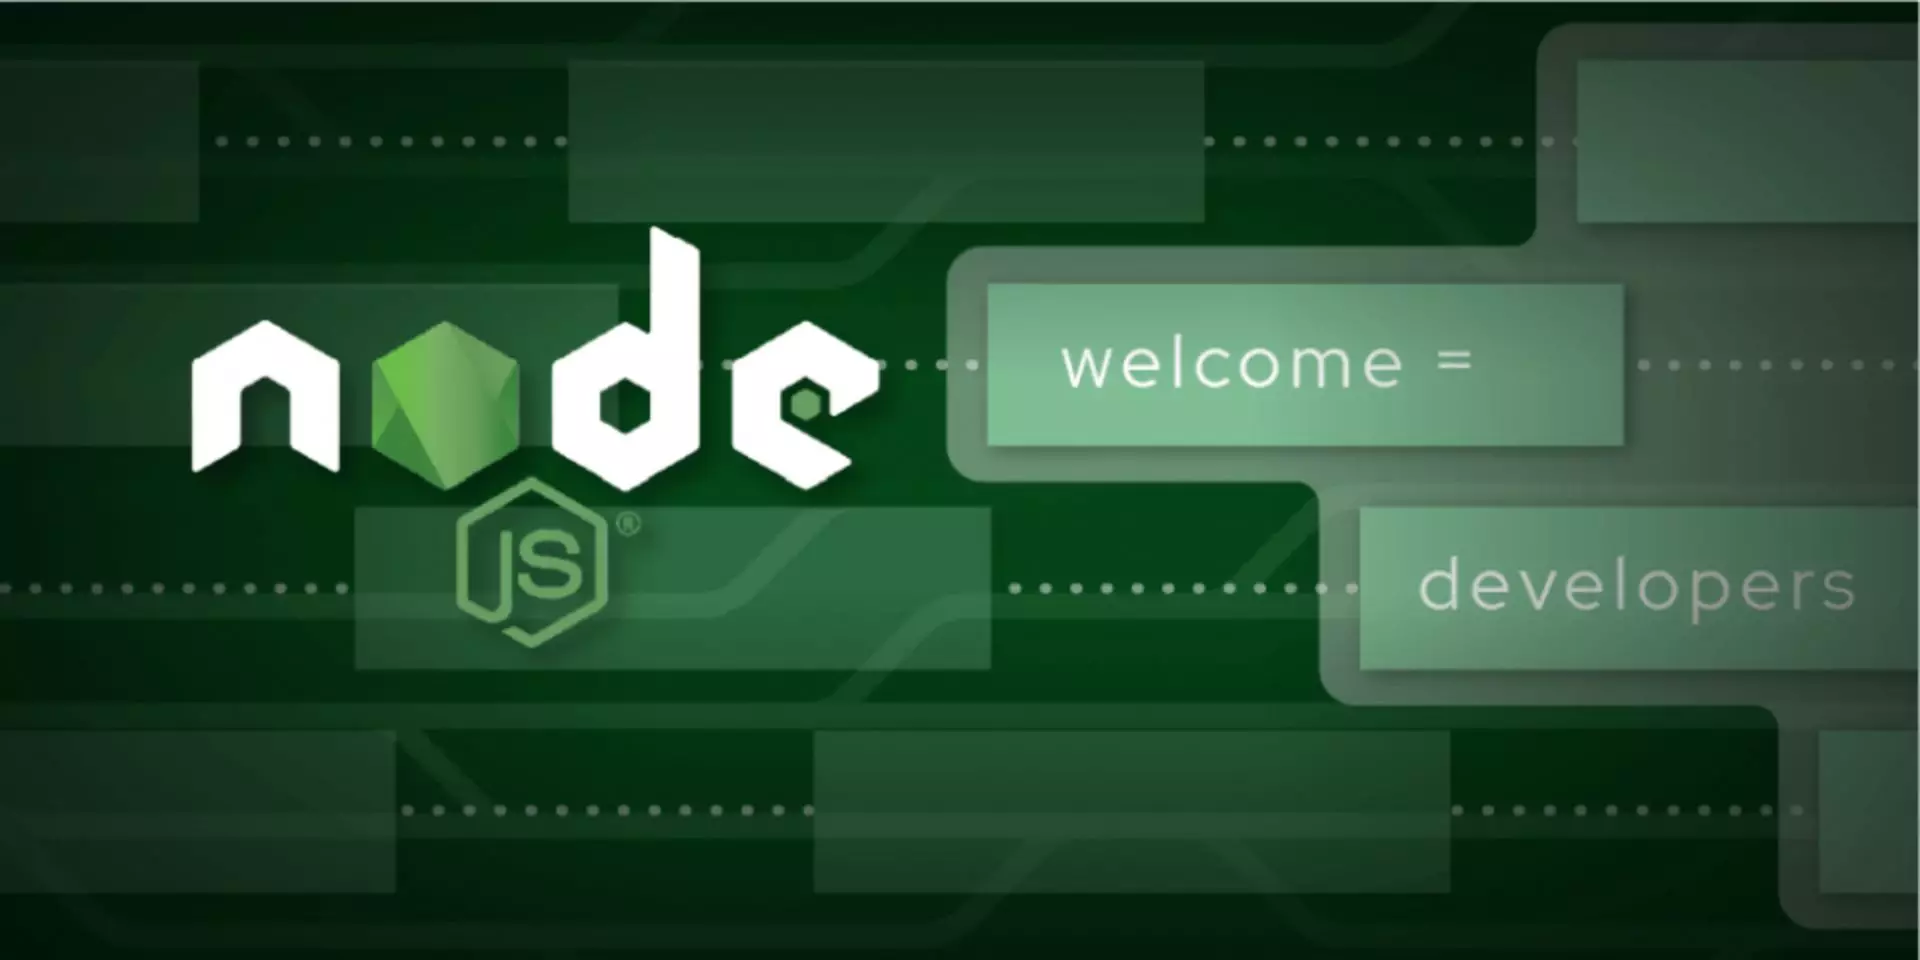 Which Kind of Application that Nodejs is the Best Fit for?